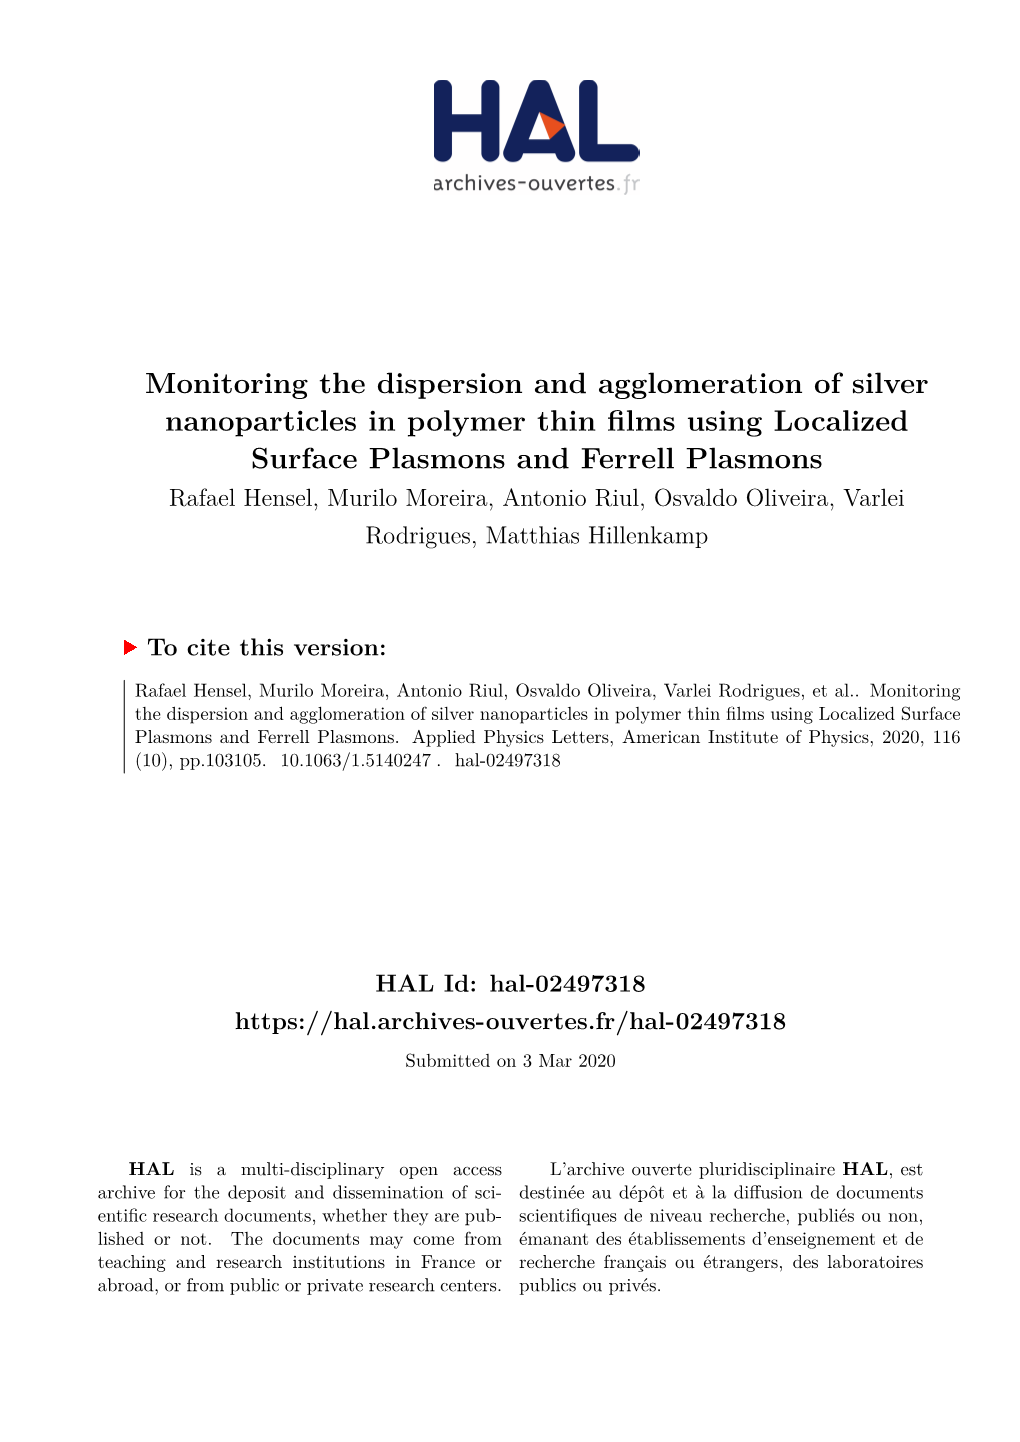 Monitoring the Dispersion and Agglomeration of Silver